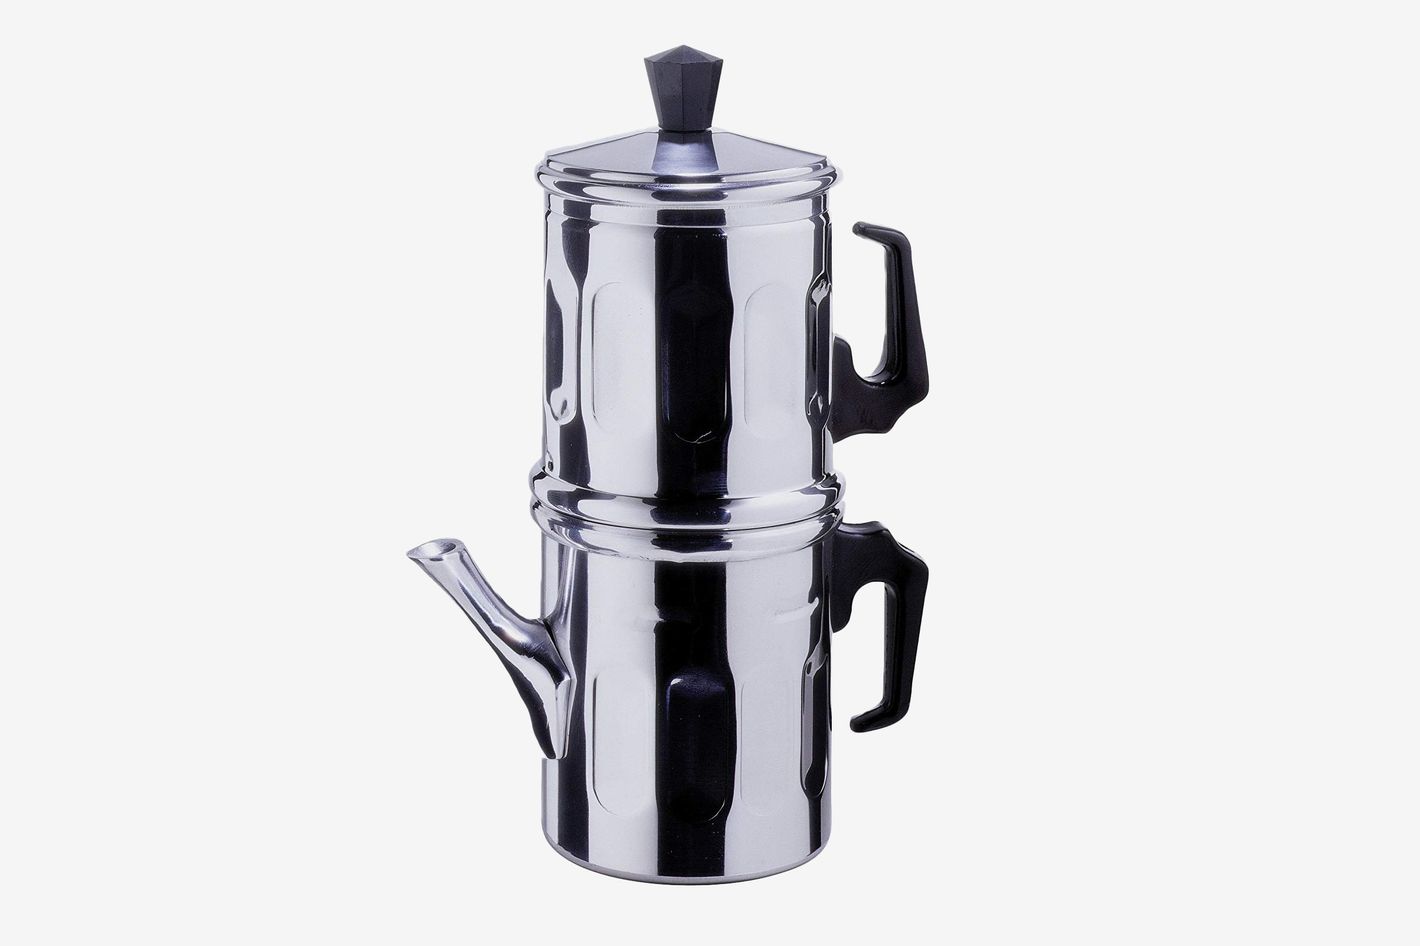 Neapolitan coffee makers, the classic models on offer